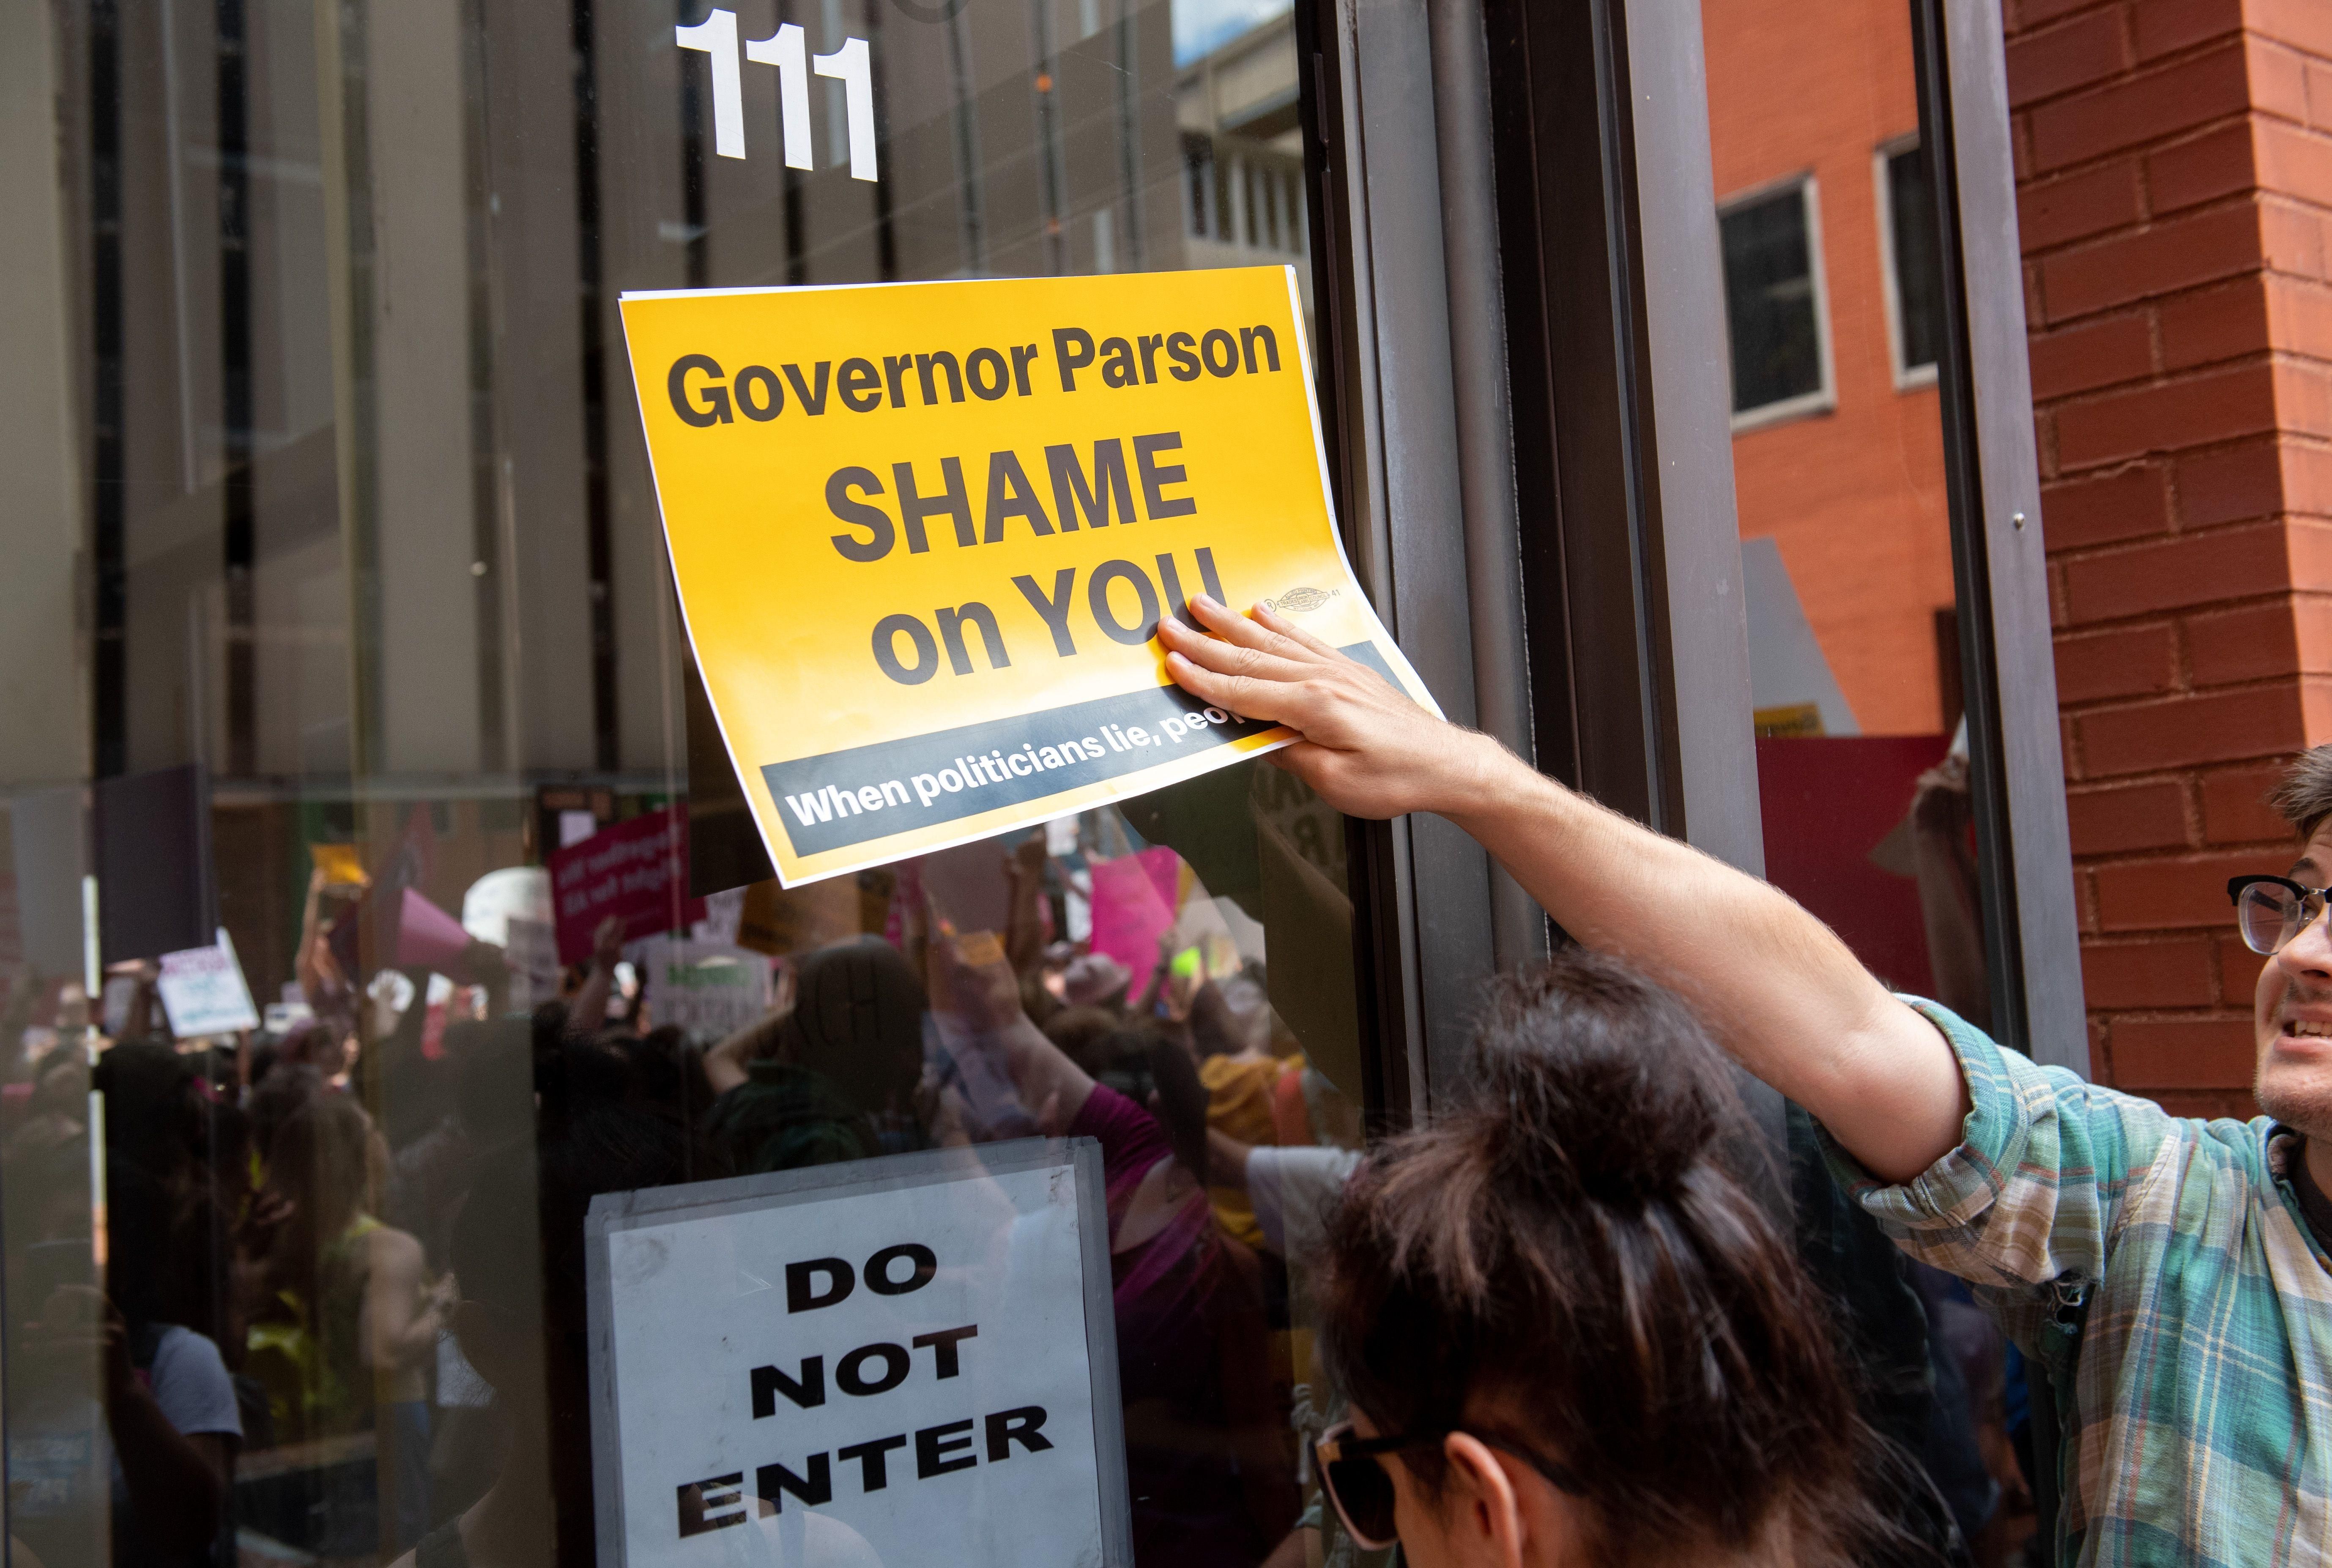 Protesters demonstrate outside of the offices of Missouri's Republican governor.